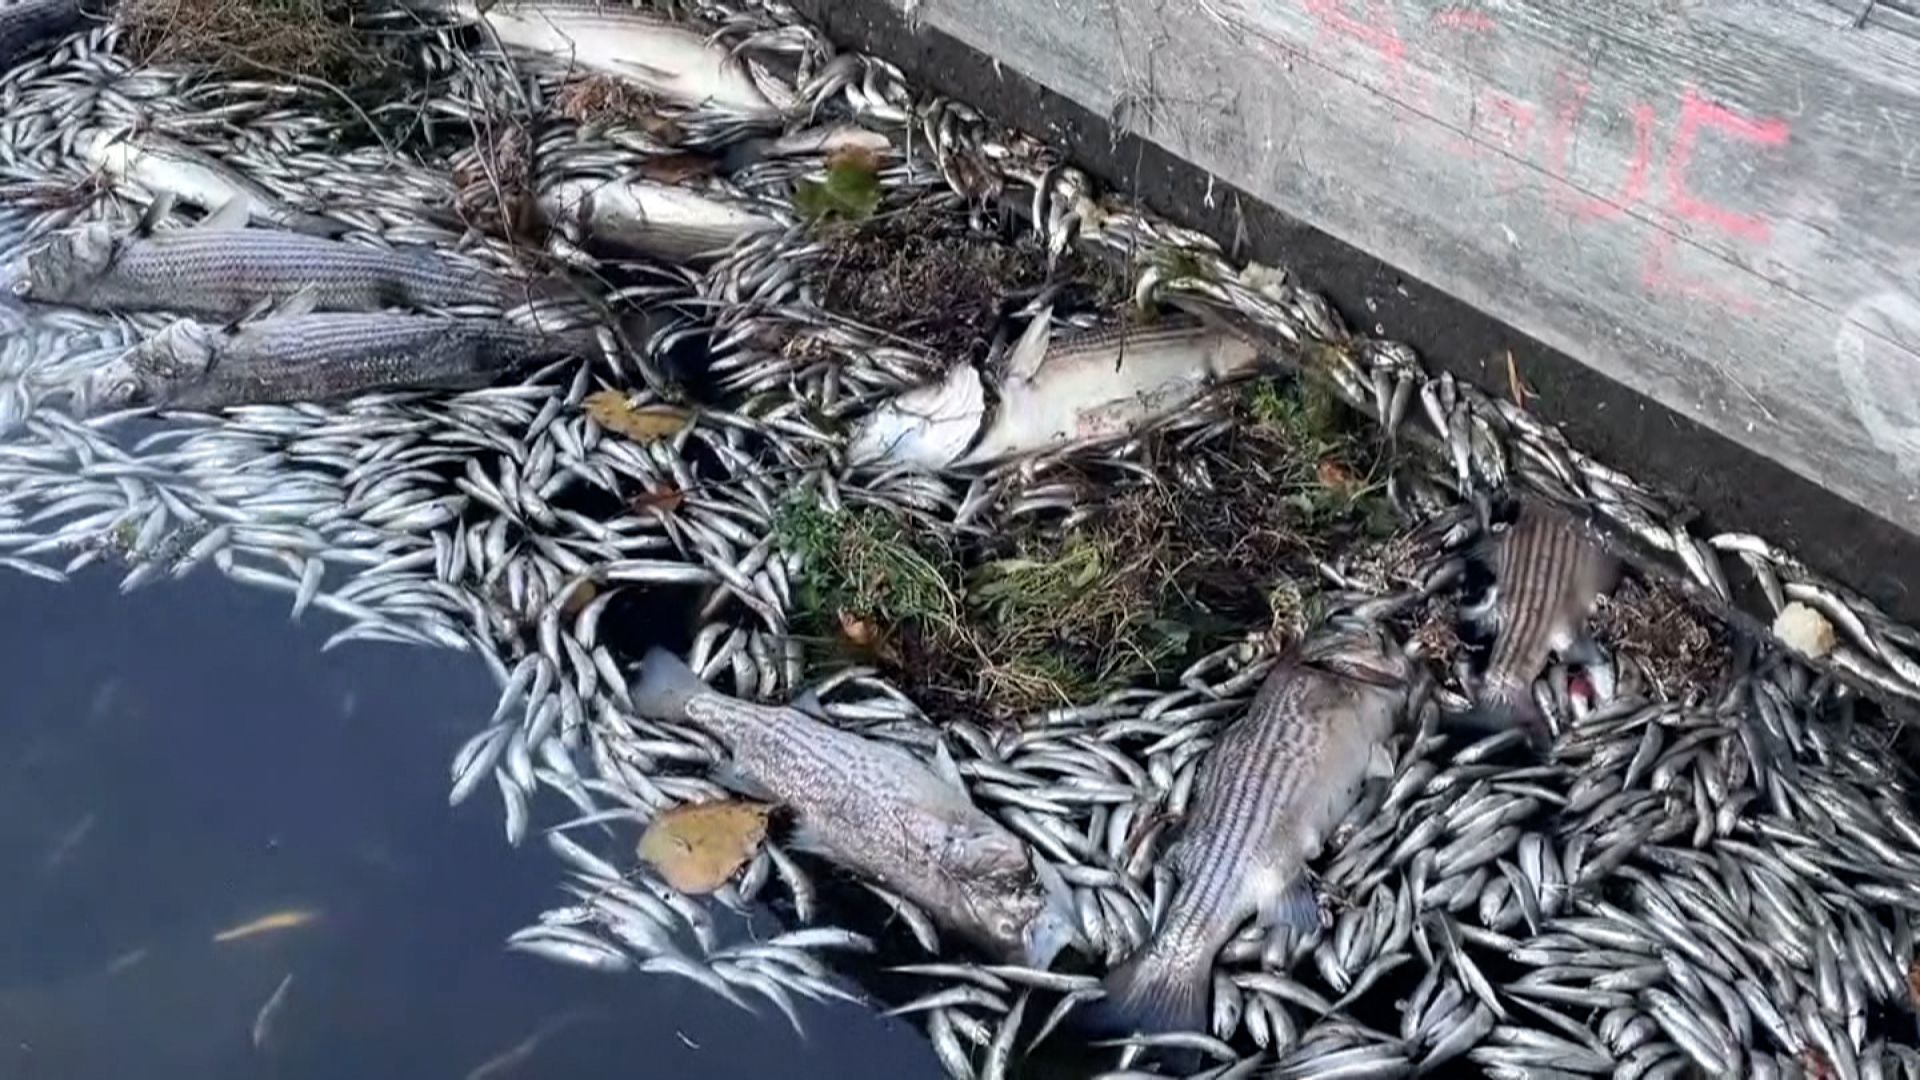 Algae bloom has killed thousands of fish in the San Francisco Bay Area